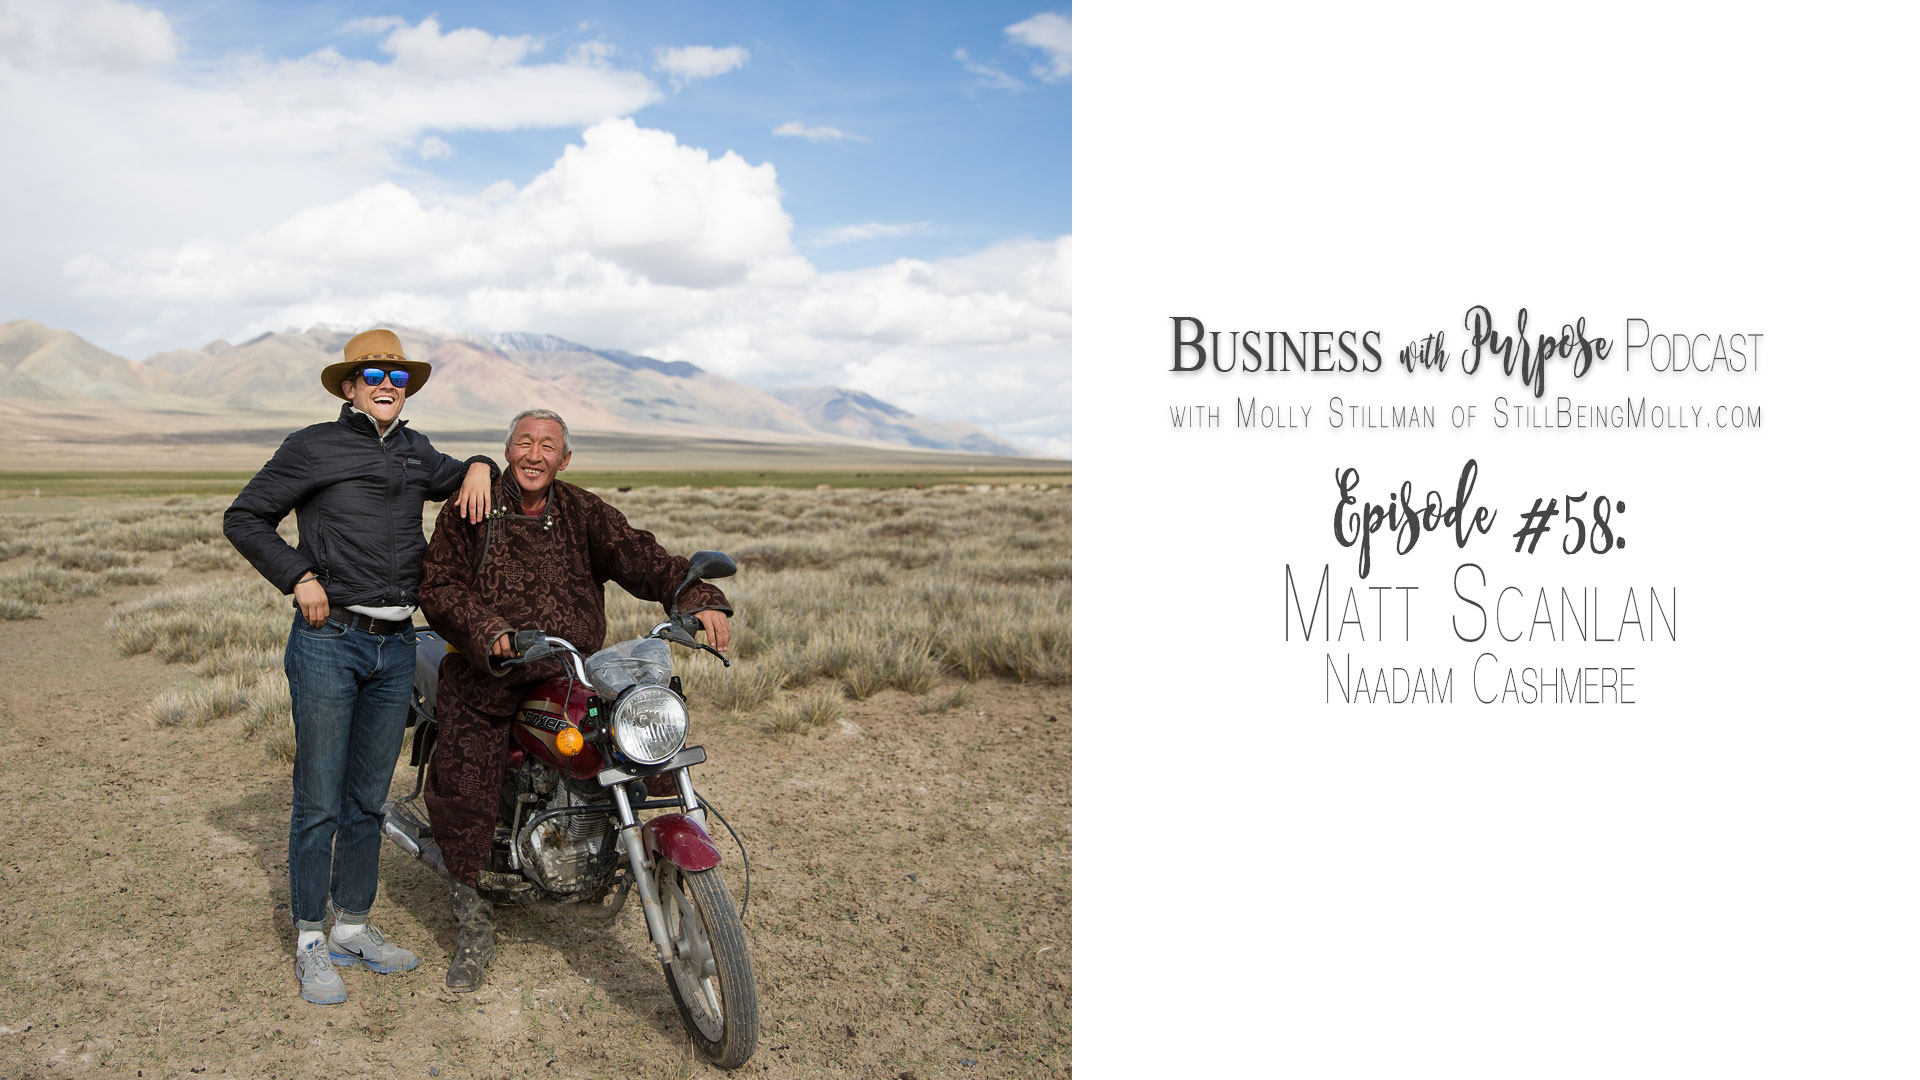 Business with Purpose Podcast EP 58: Matt Scanlan, Founder of NAADAM, Sustainable Mongolian Cashmere Clothing - Business Podcast by North Carolina ethical fashion blogger Still Being Molly